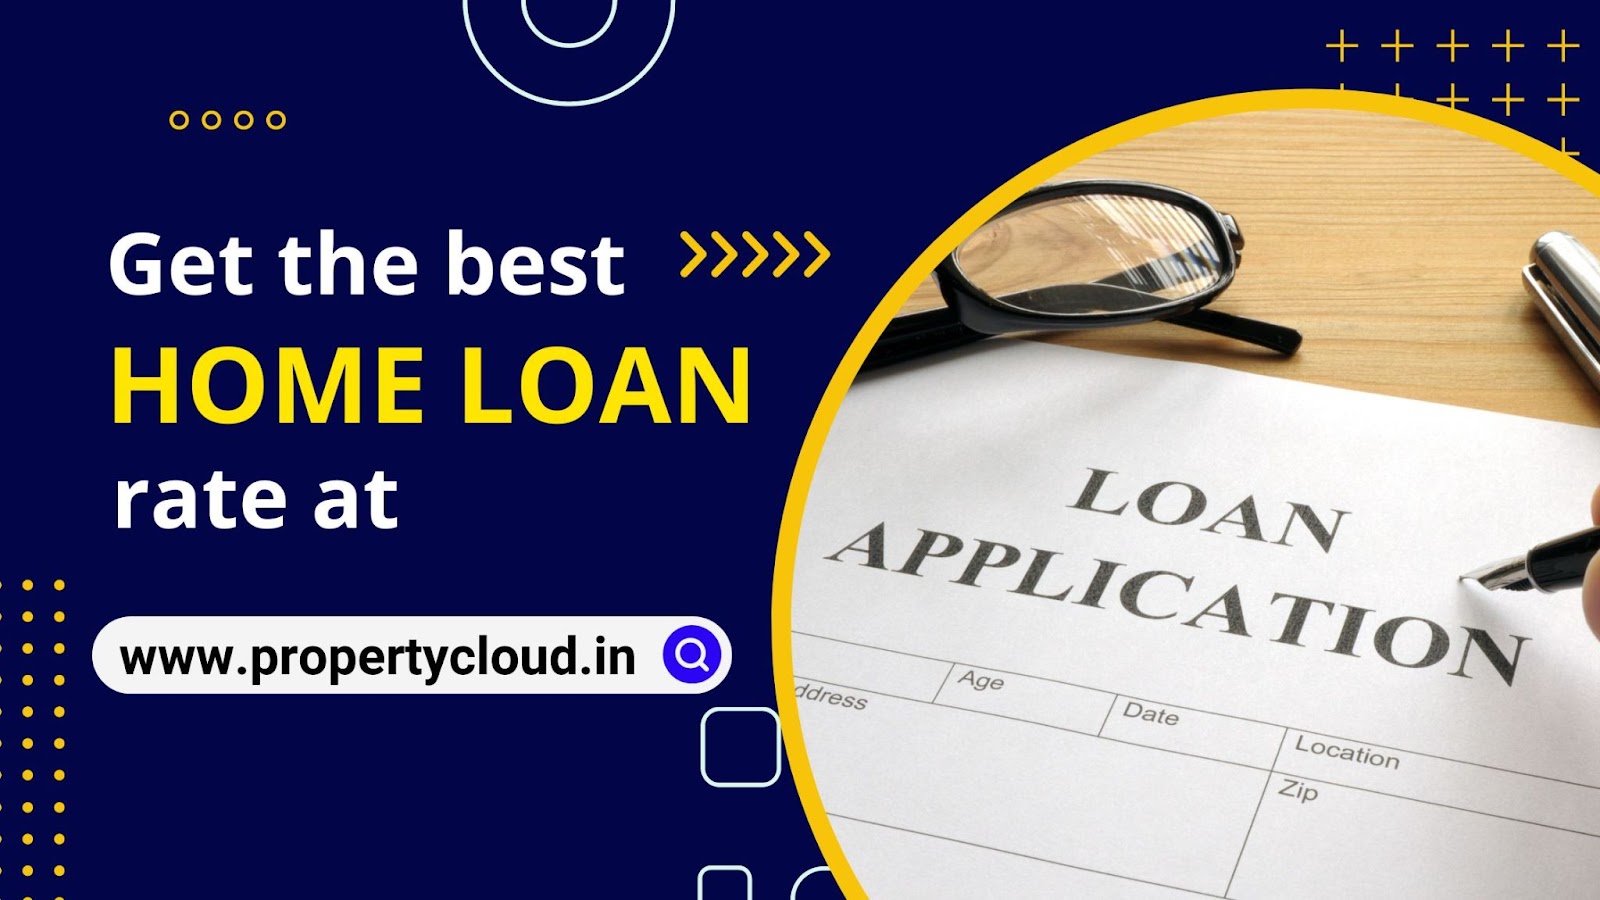 Reach out to PropertyCloud and get the best home loan rate only on PropertyCloud